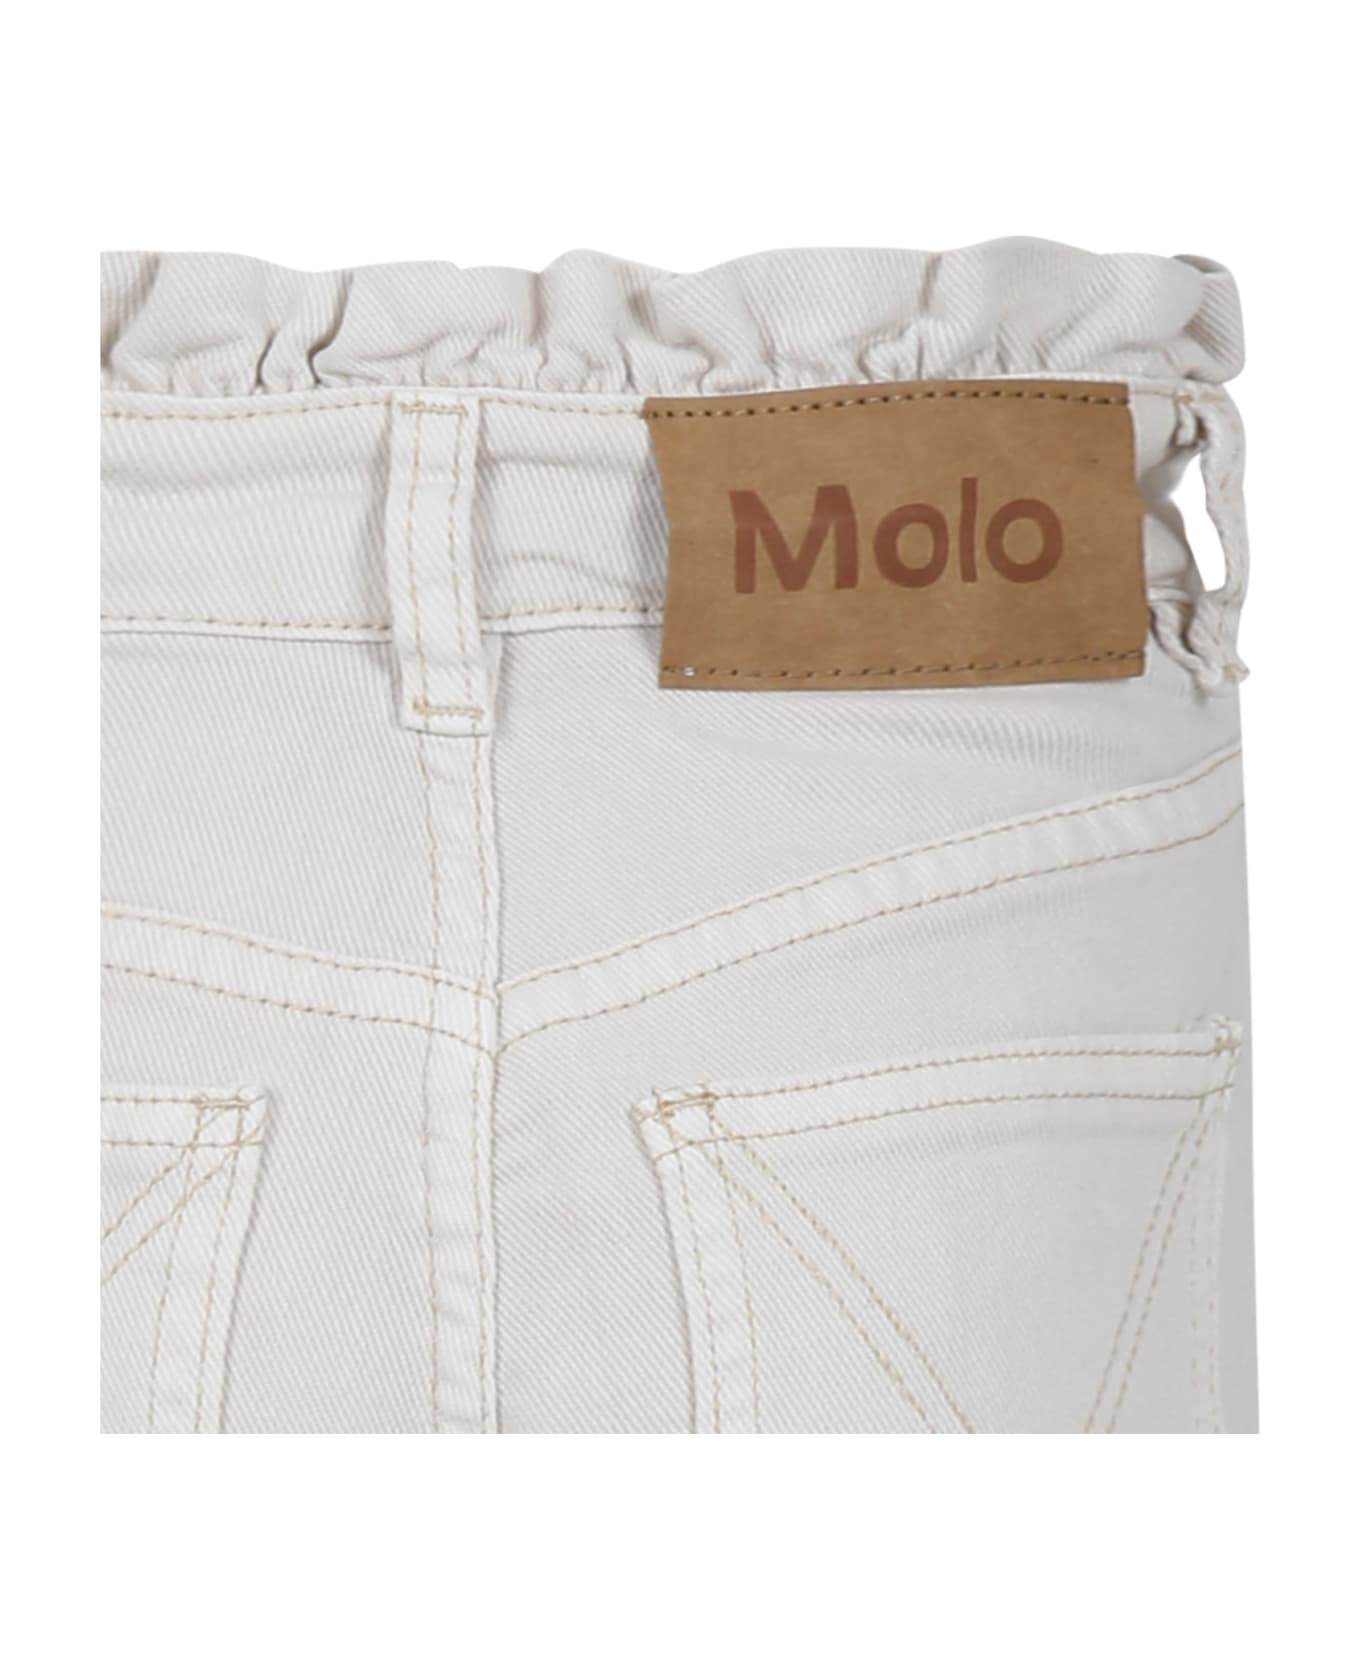 Molo Ivory Jeans For Kids - Ivory ボトムス